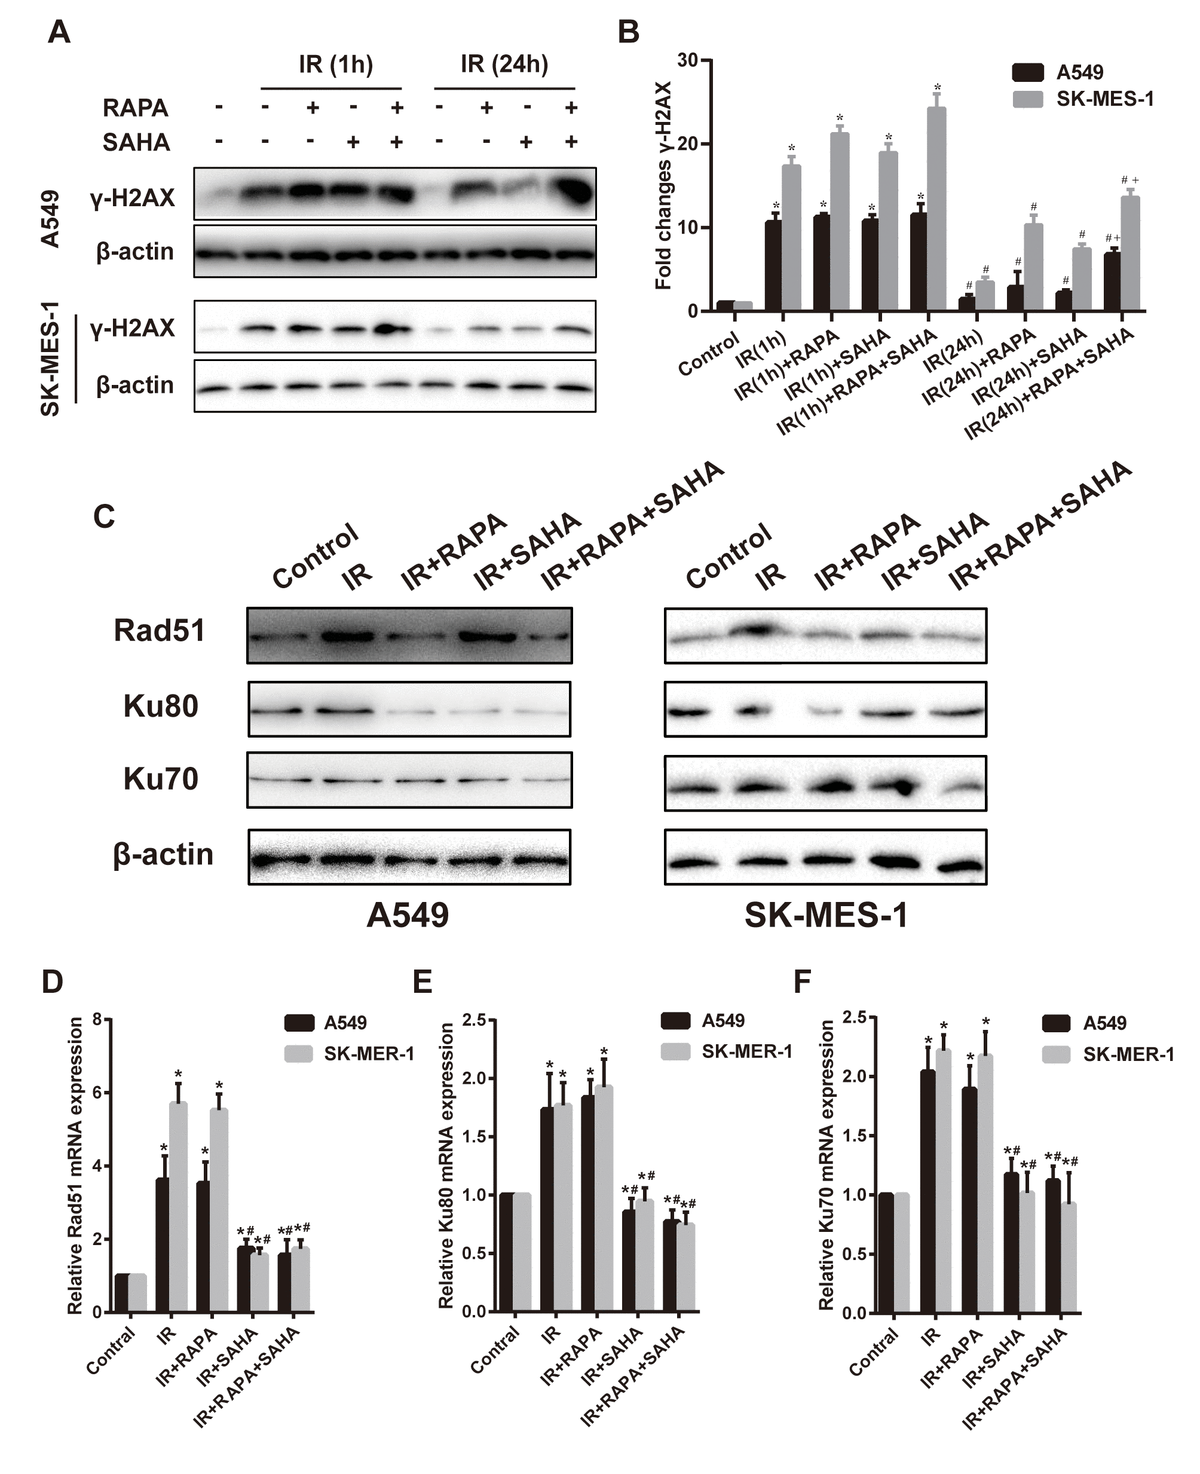 Effects of combination treatment with RAPA and SAHA on DNA damage and repair after IR in NSCLC cells. (A, B) the protein level of γ-H2AX was determined by western blot analysis. Two NSCLC cells (A549, SK-MES-1) were treated with RAPA (100nmol/L) or/and SAHA (2.5μmol/L) for 24h and were subsequently exposed to IR (4Gy), the γ-H2AX protein was tested at 1h and 24h after IR. *p#p+pC–F) the protein (C) and mRNA level of Rad51 (D), Ku80 (E), Ku70 (F) were determined by western blot and RT-qPCR analysis. Two NSCLC cells (A549, SK-MES-1) were treated with RAPA (100nmol/L) or/and SAHA (2.5μmol/L) for 24h and were subsequently exposed to IR (4Gy) and were tested after 4h. *p#p